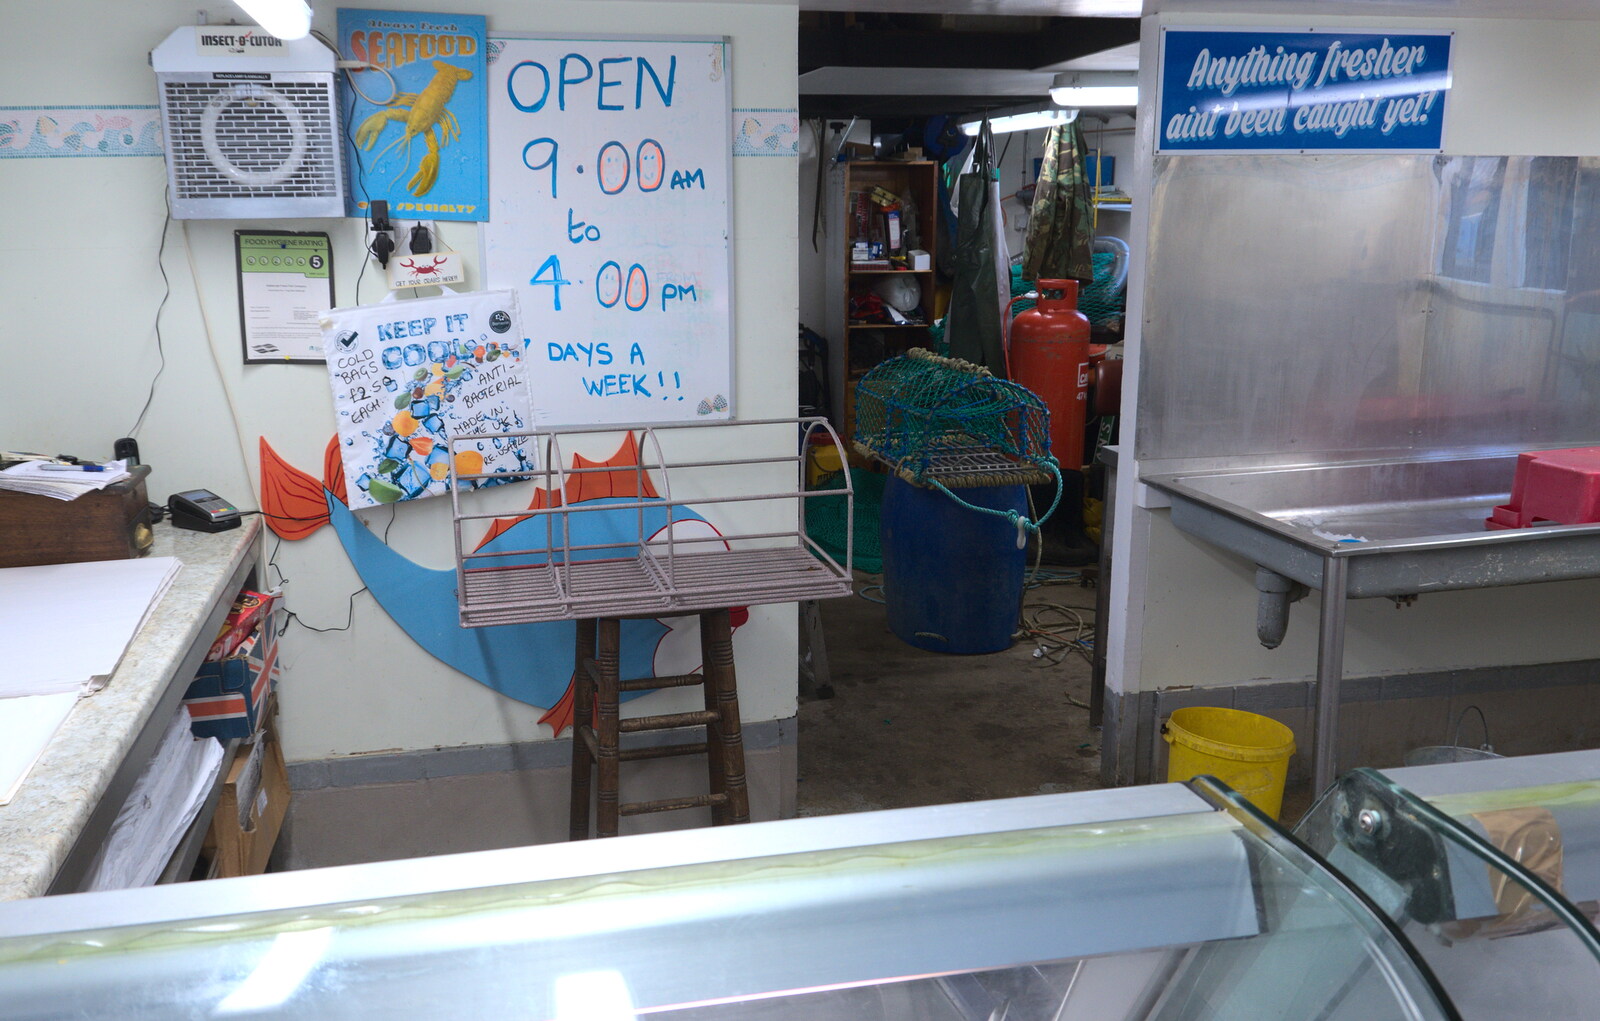 The Aldeburgh fish stall counter from A Postcard from Aldeburgh, Suffolk - 6th January 2019